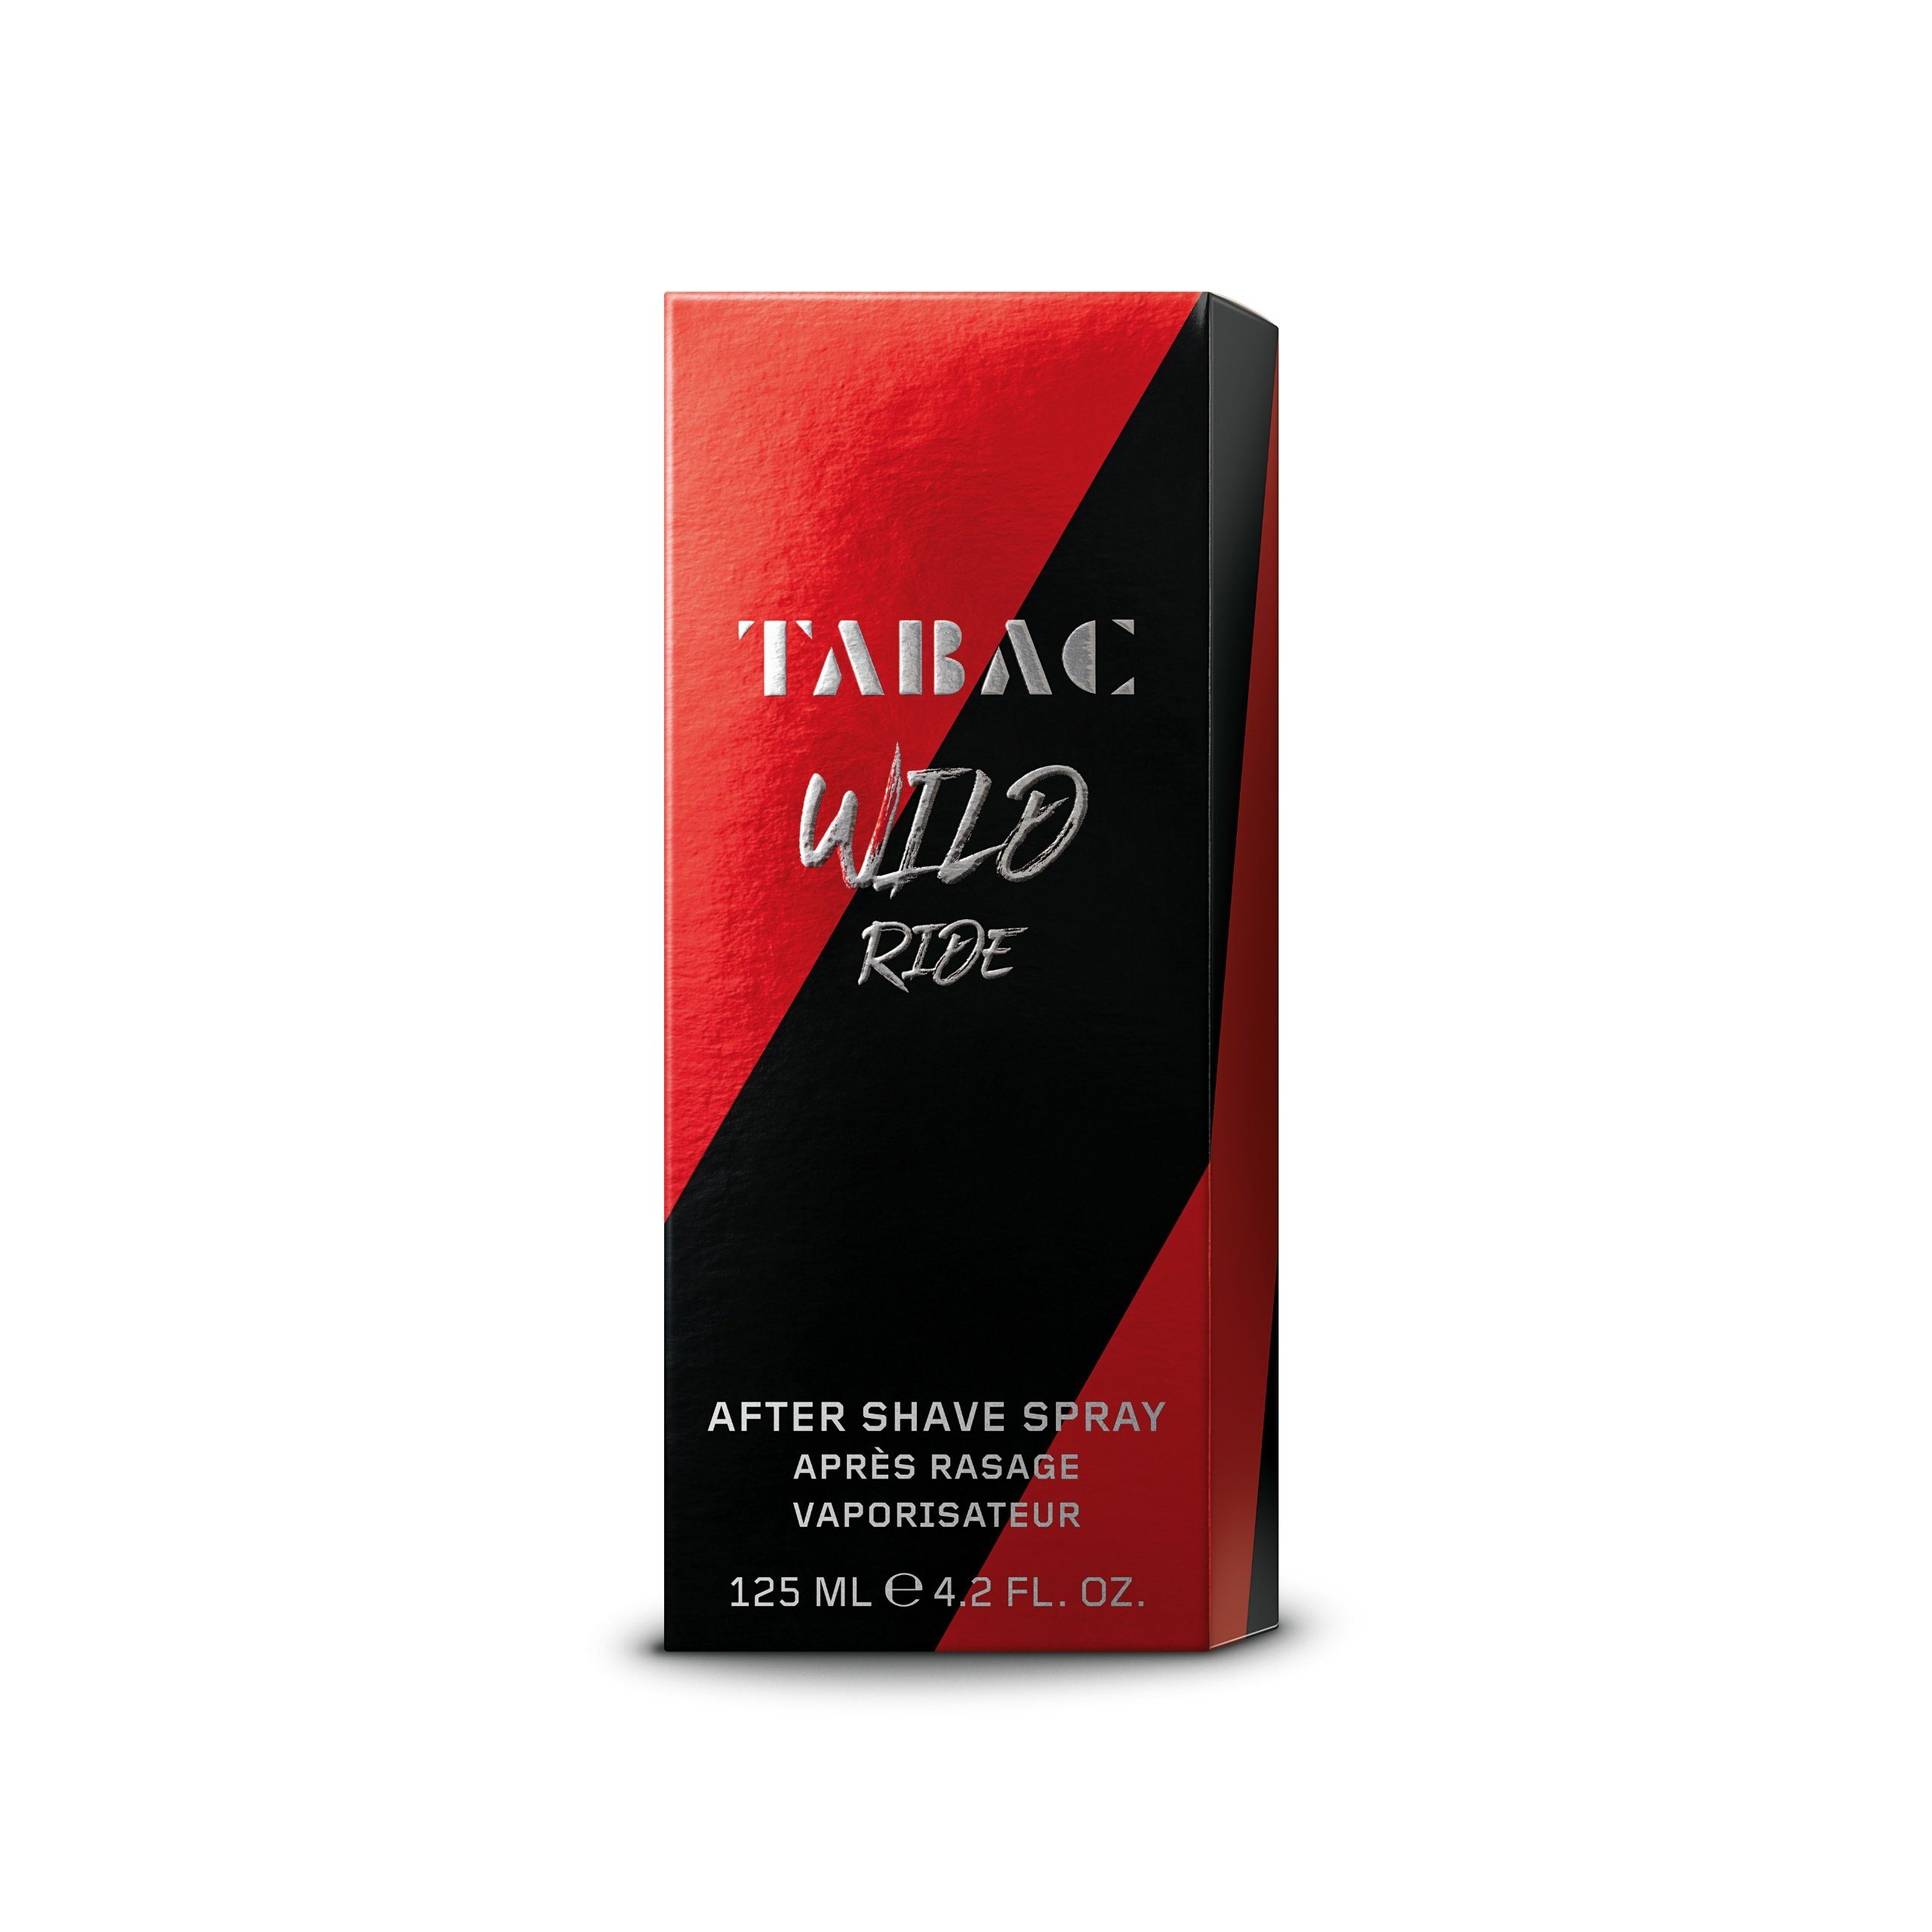 Wild ml 125 Ride Lotion Gesichts-Reinigungslotion Wild After Shave Tabac Tabac Ride